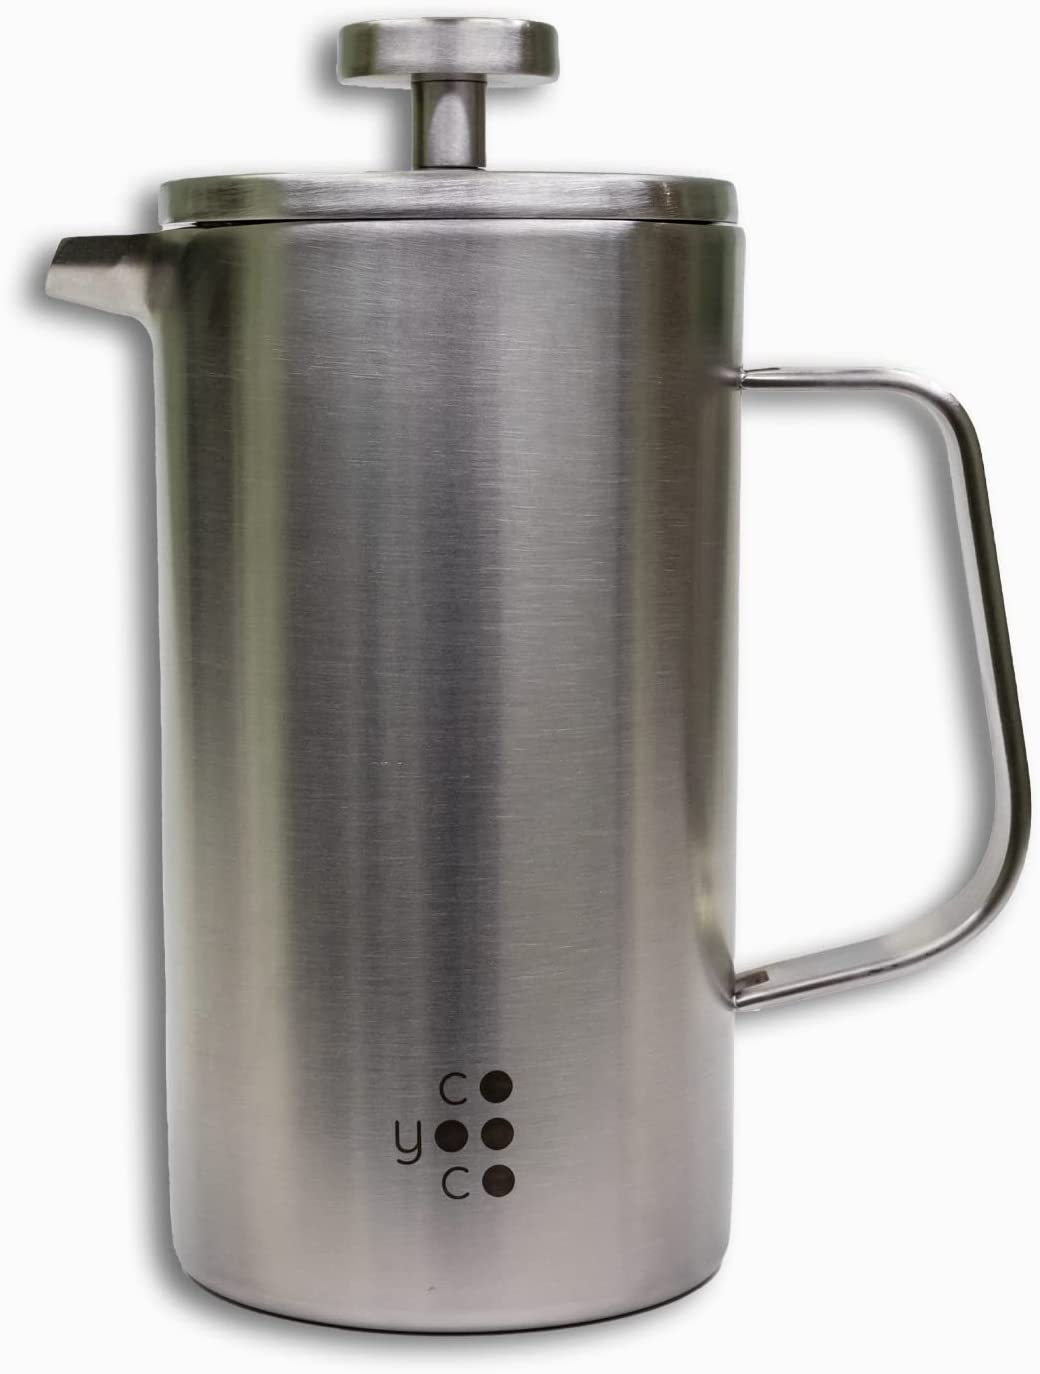 COYOOCO French Press Stainless Steel (Coffee Press for 4 or 2 Cups of Coffee) Thermal Coffee Maker for Camping (800 ml for 4 Cups)